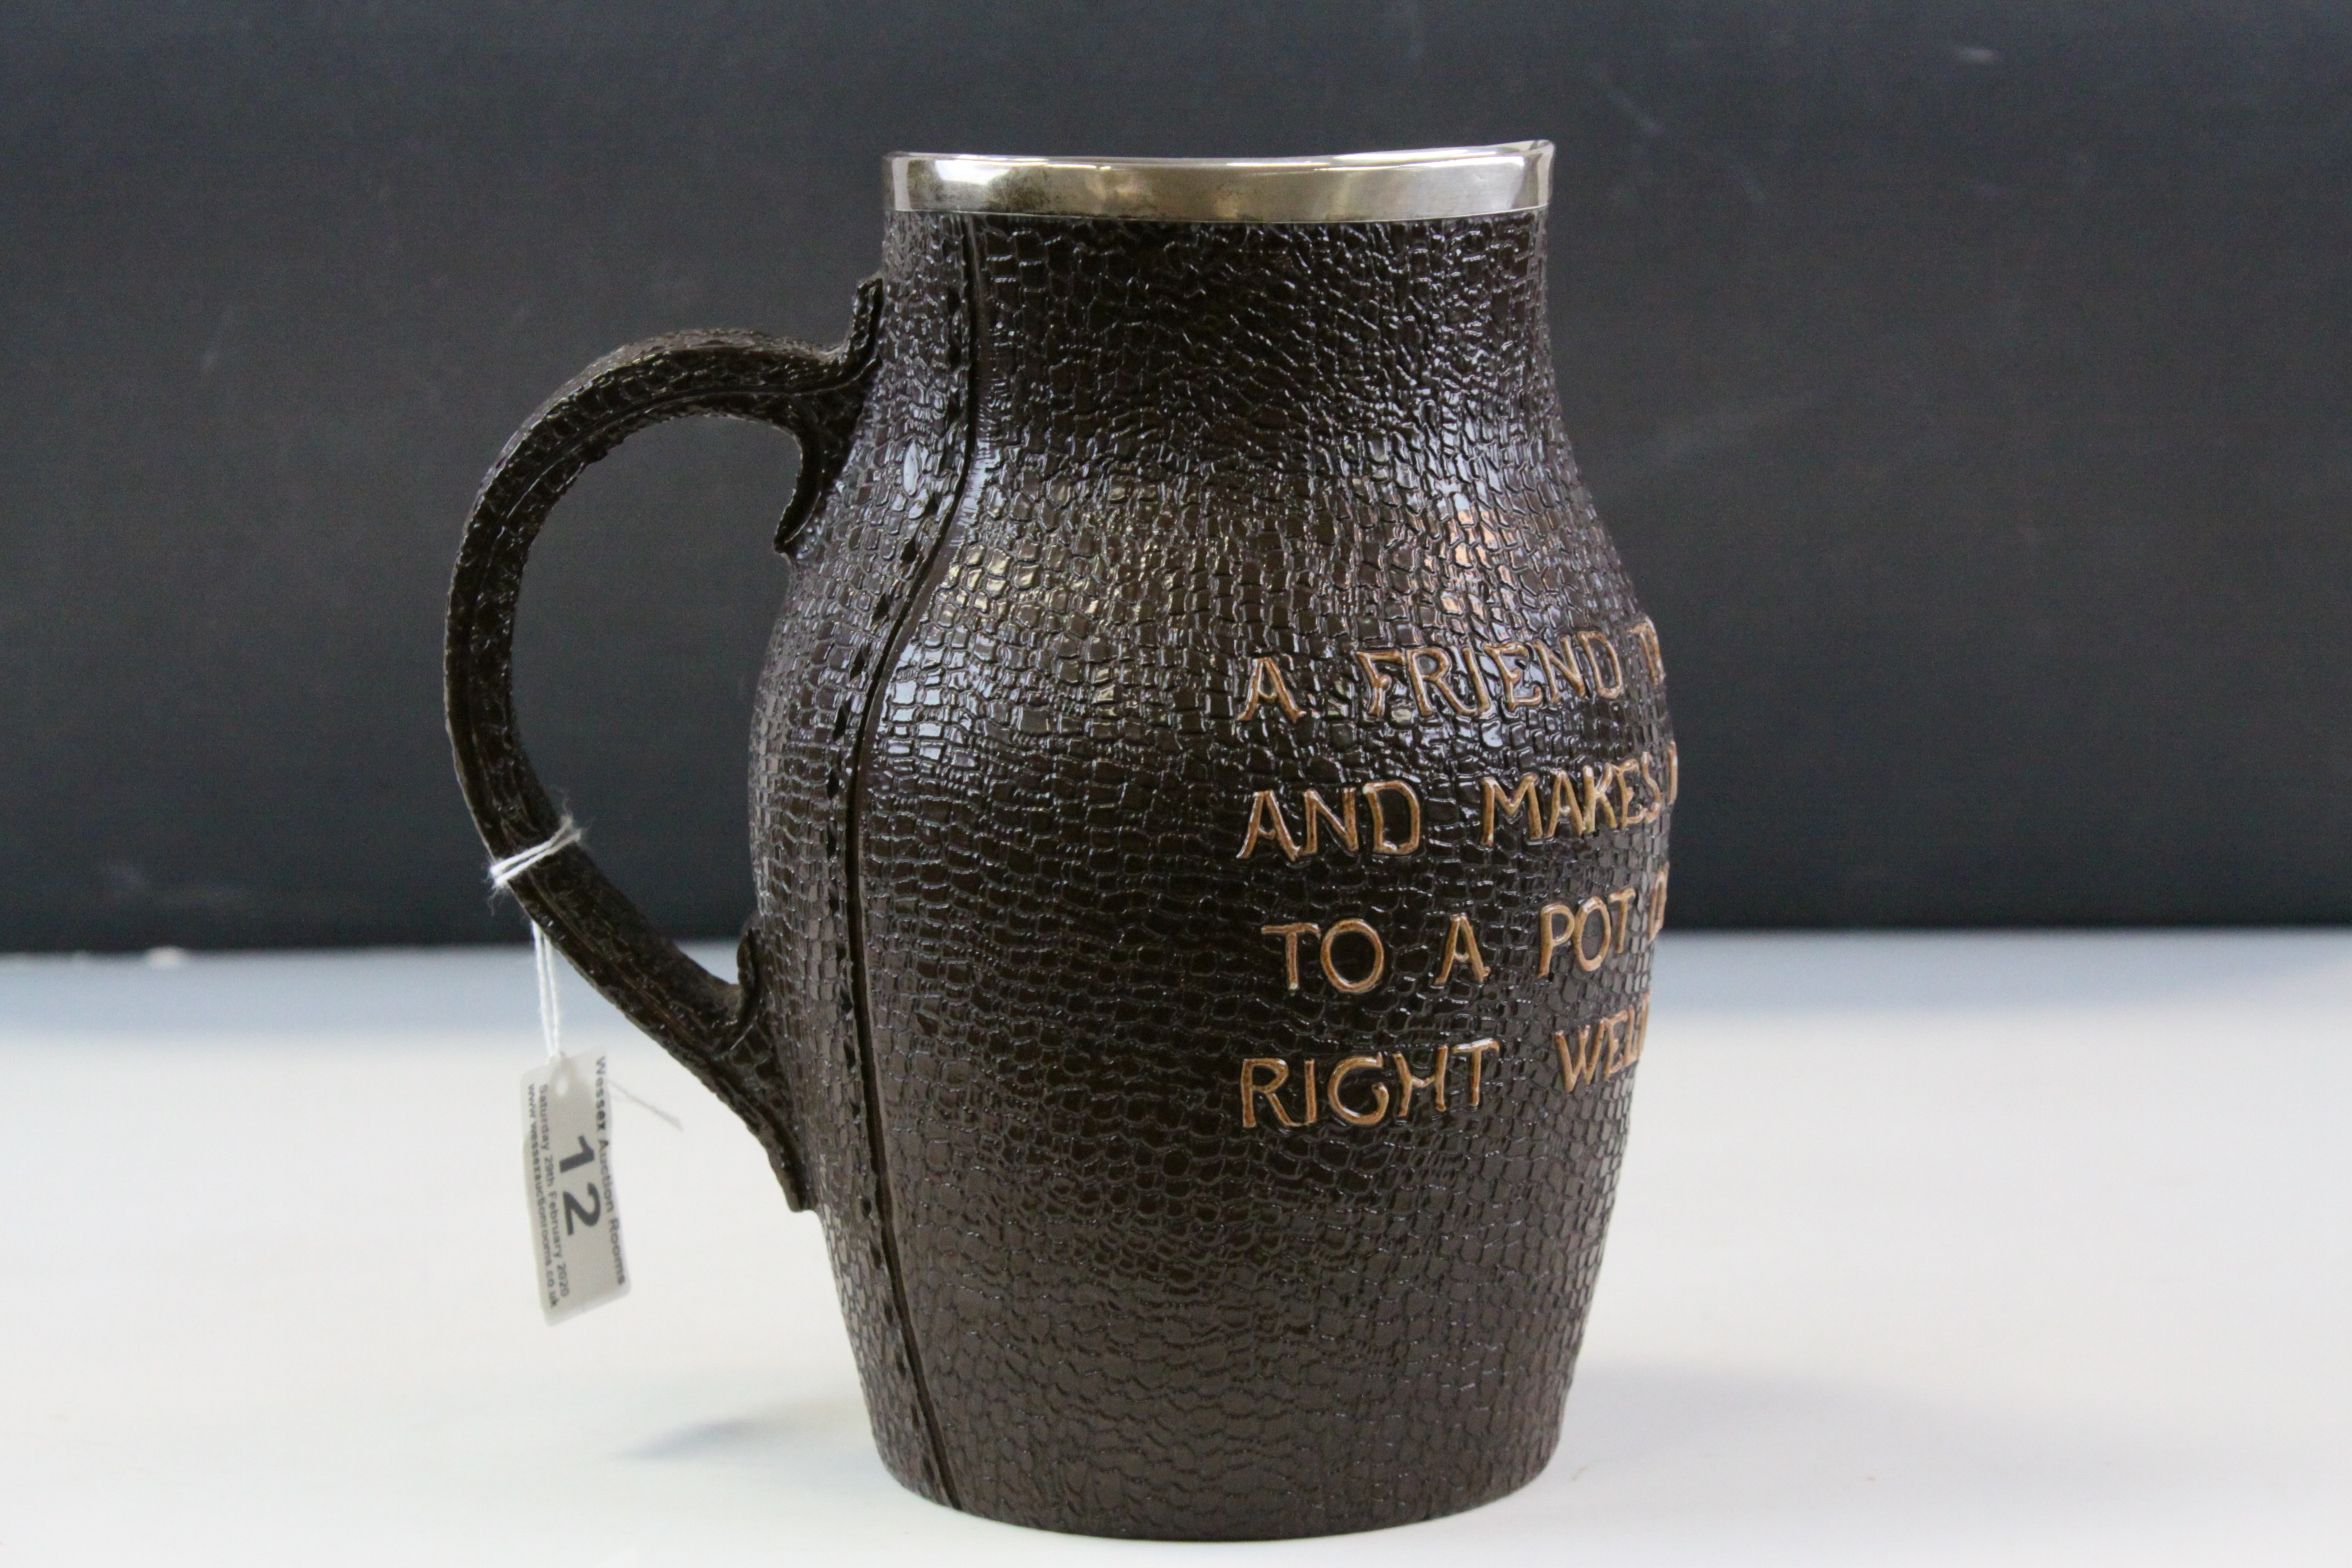 Doulton Lambeth Stater's Patent Stoneware Water jug with Leather effect finish and inscription - Image 3 of 8